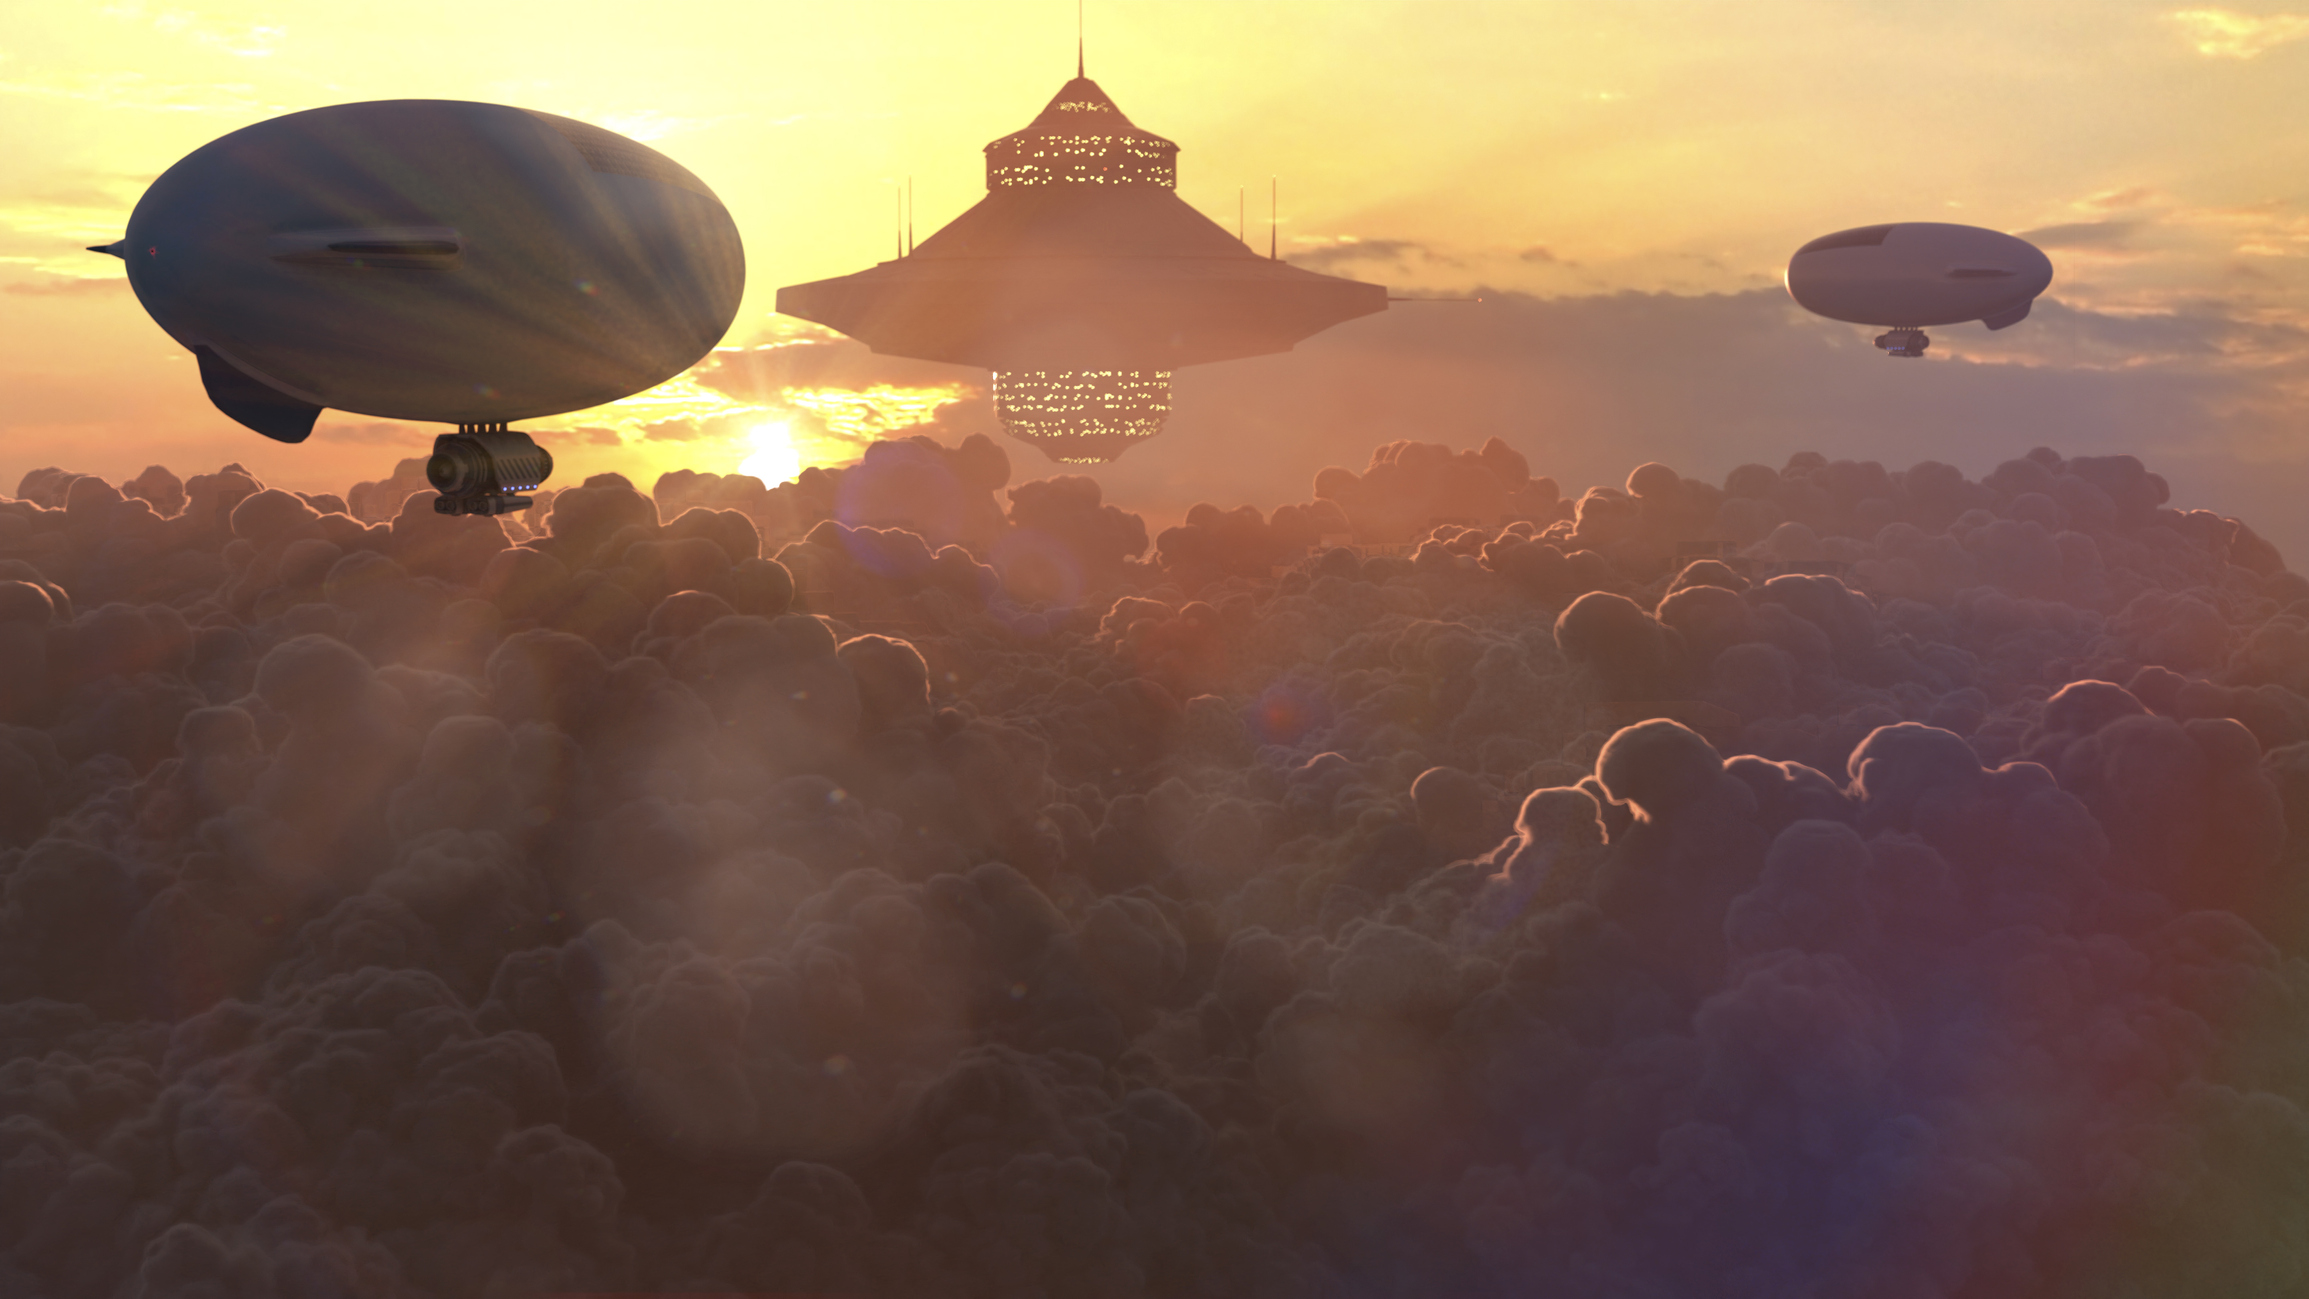 Artist's illustration of Venus' atmosphere with large airships floating above the thick clouds.